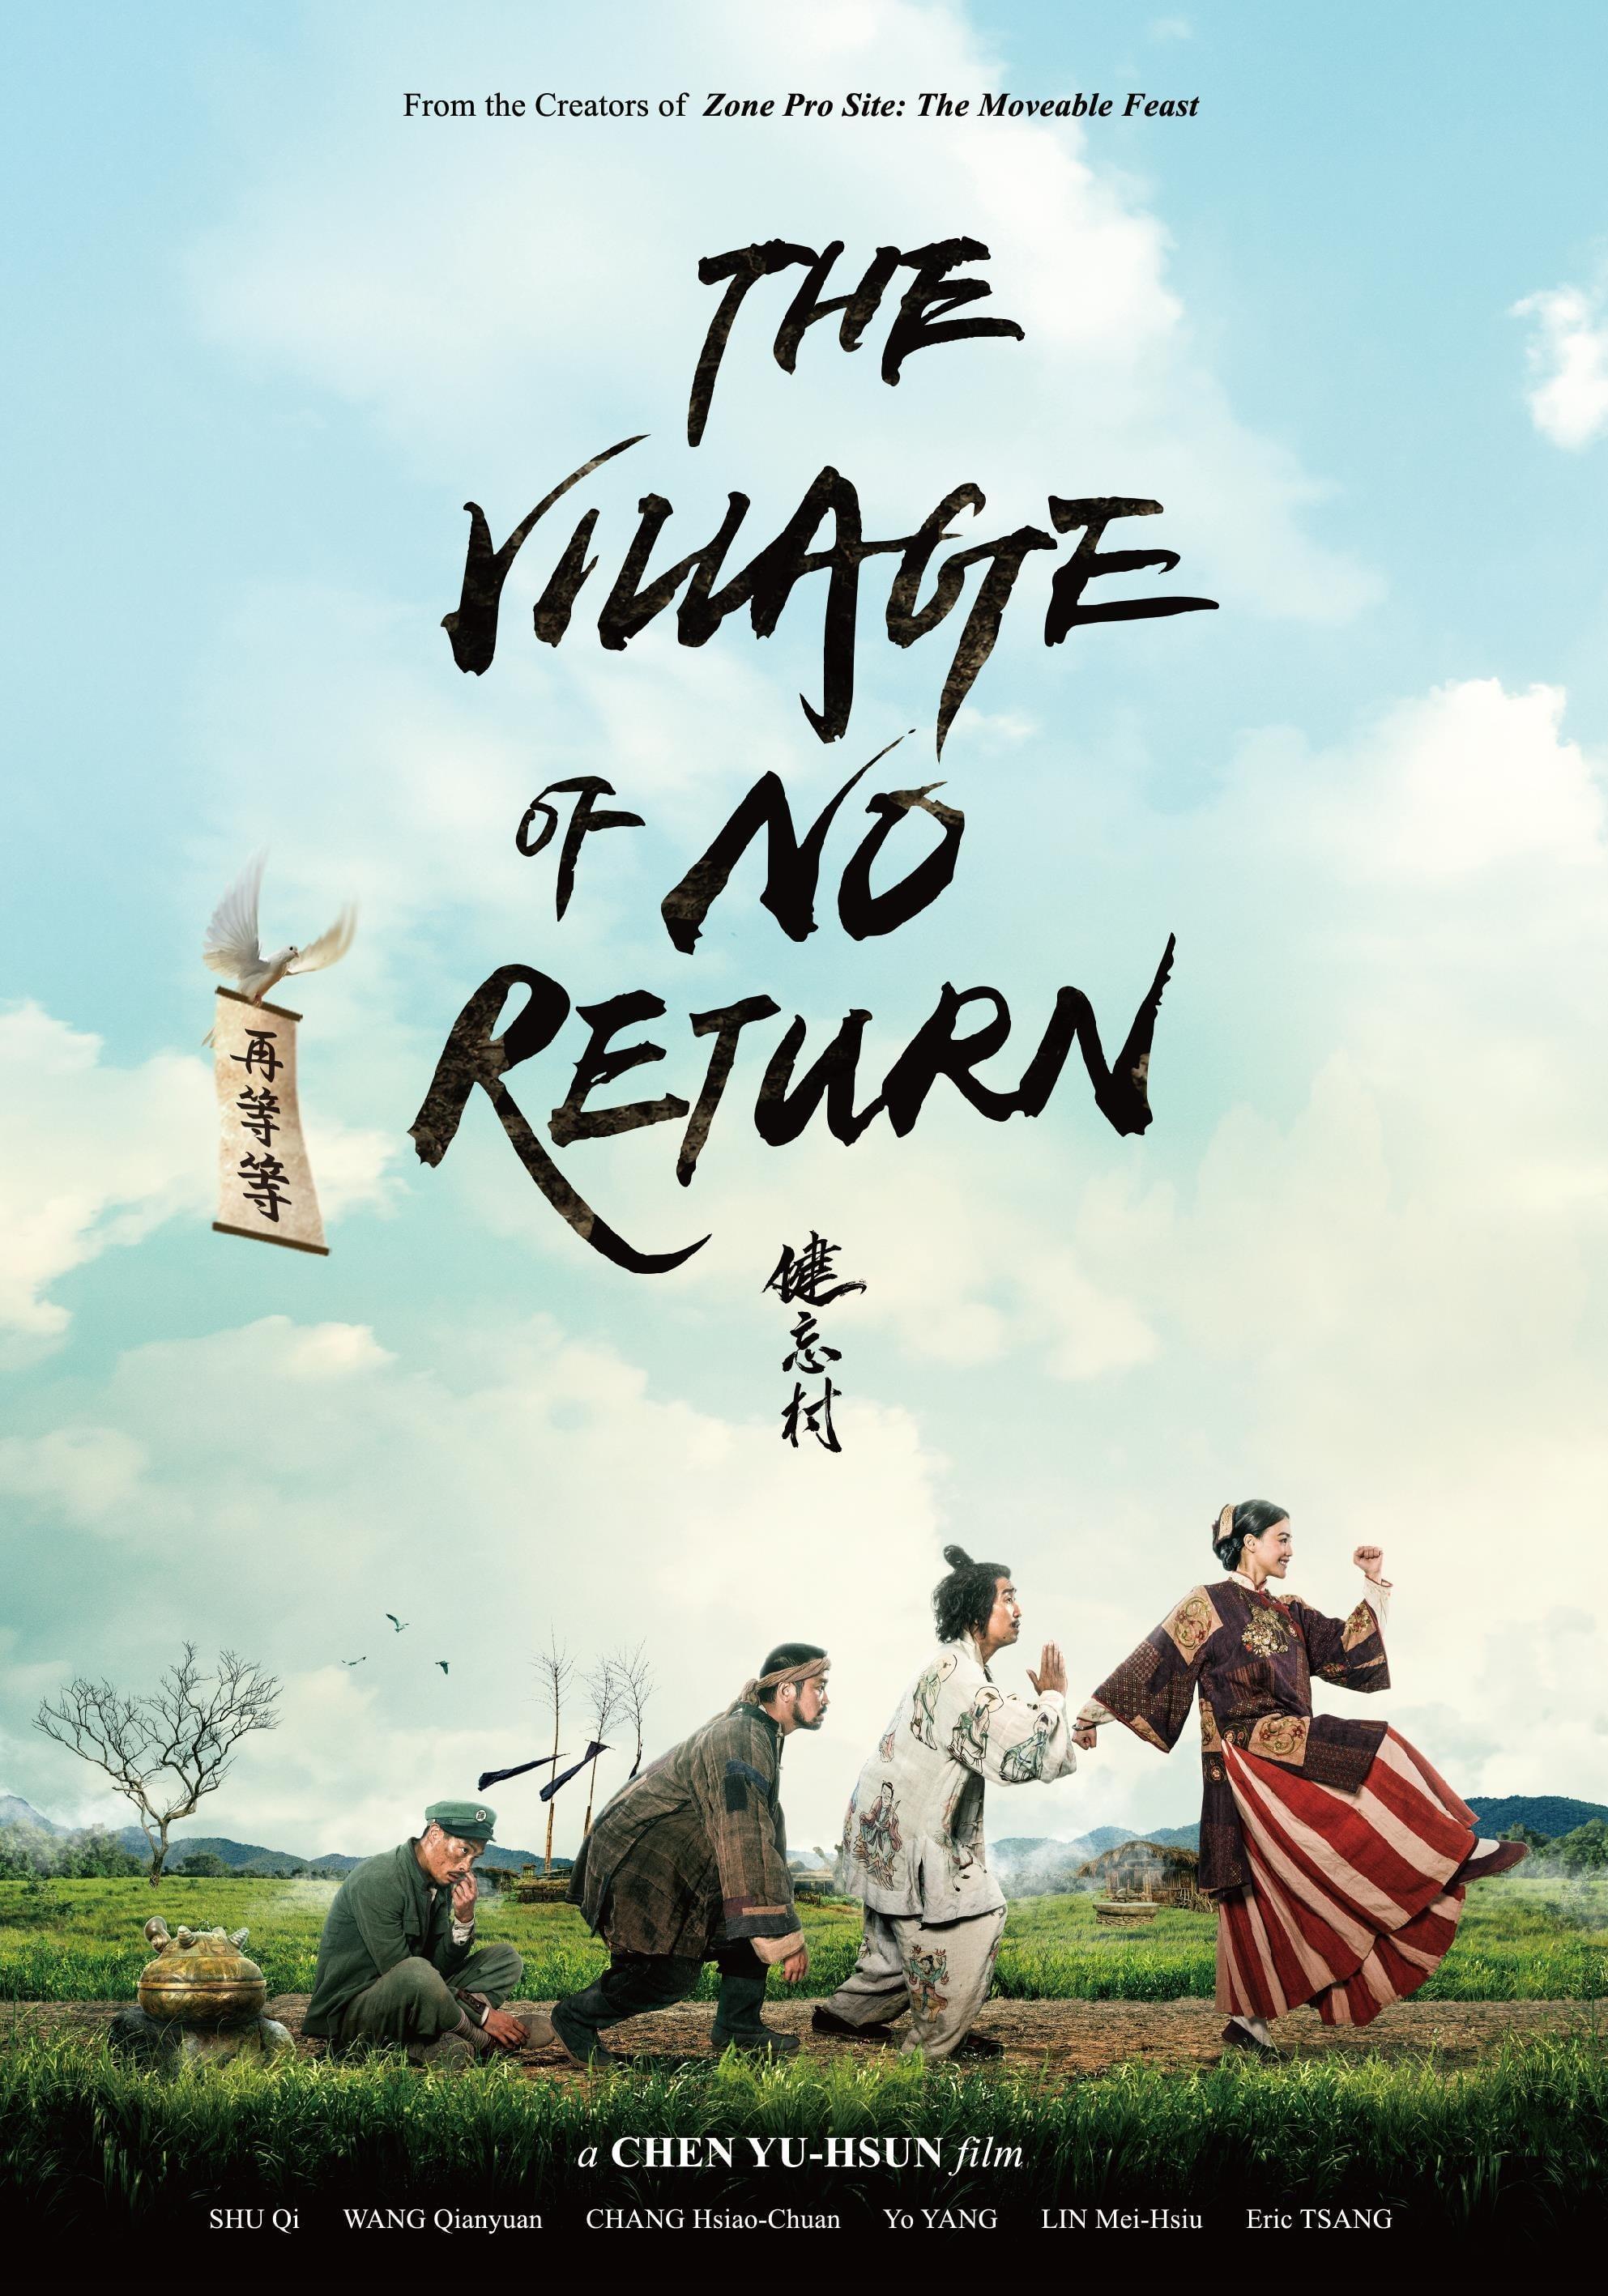 The Village of No Return poster